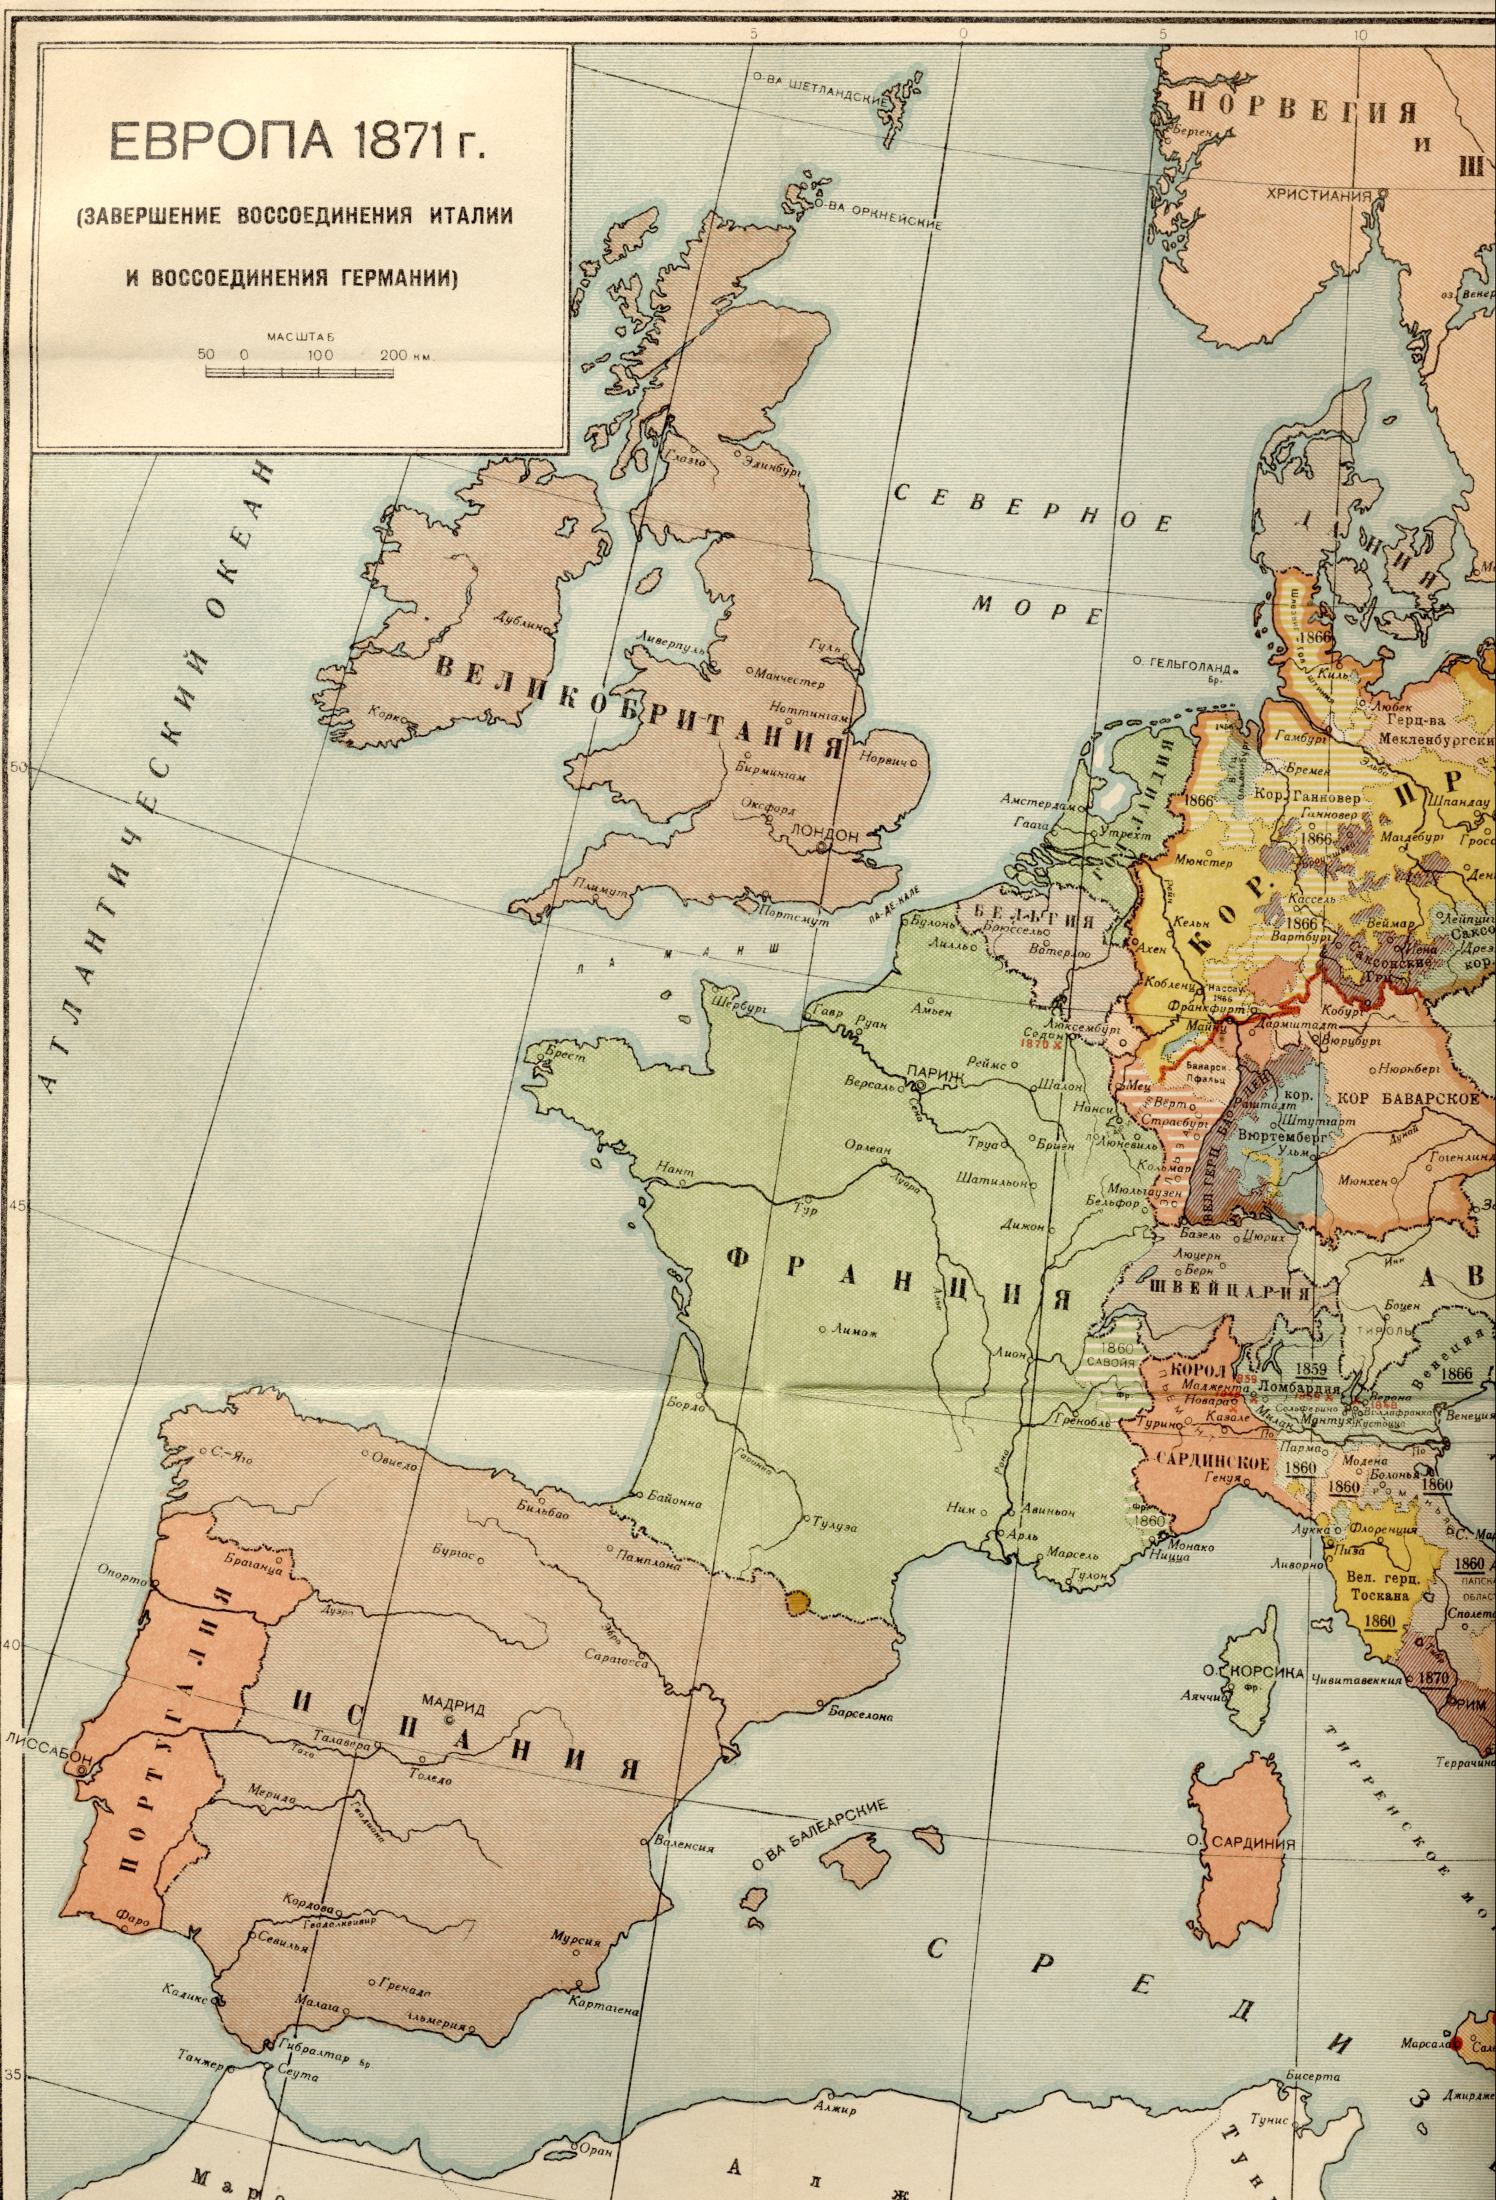 1871 year. The political map of the world - a map of Europe in 1871 - the end of the unification of Italy and the reunification of Germany